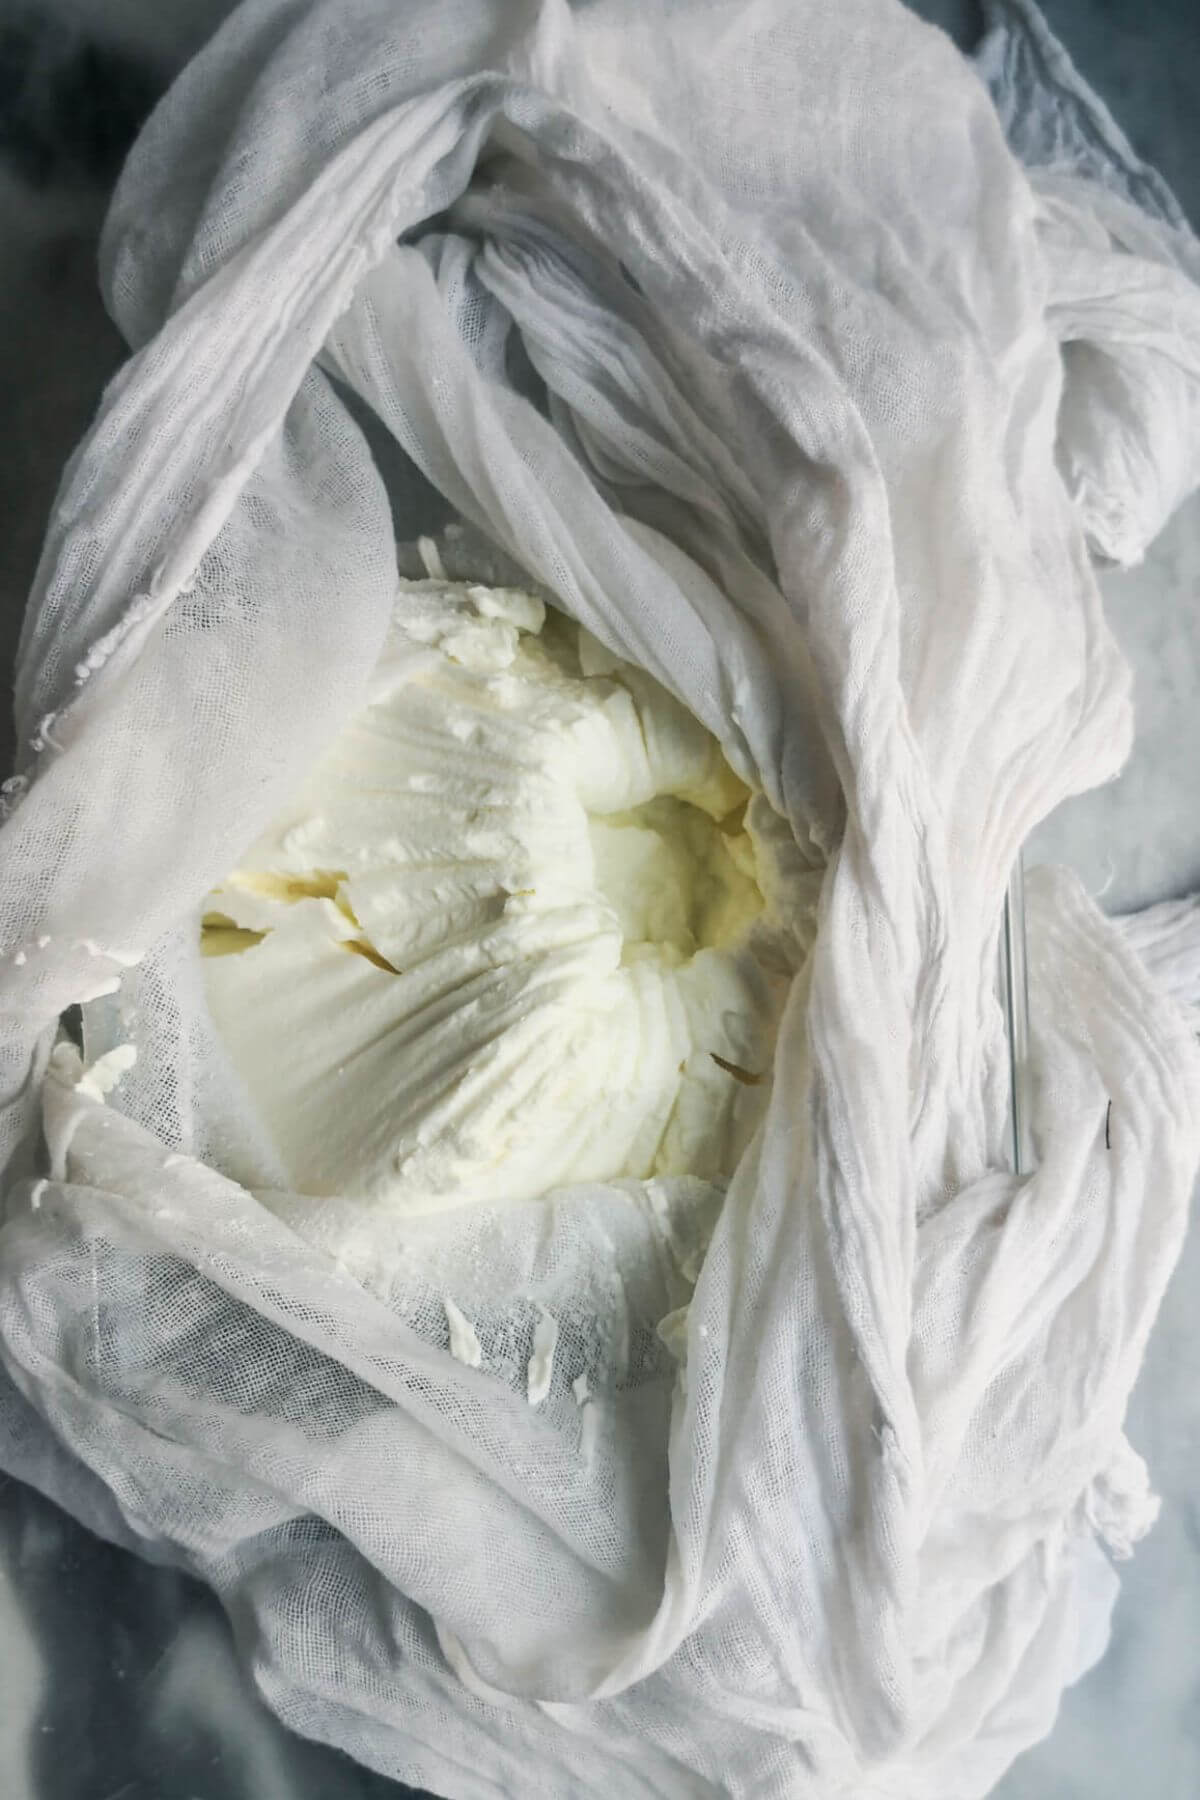 Strained labneh in a white cheesecloth.